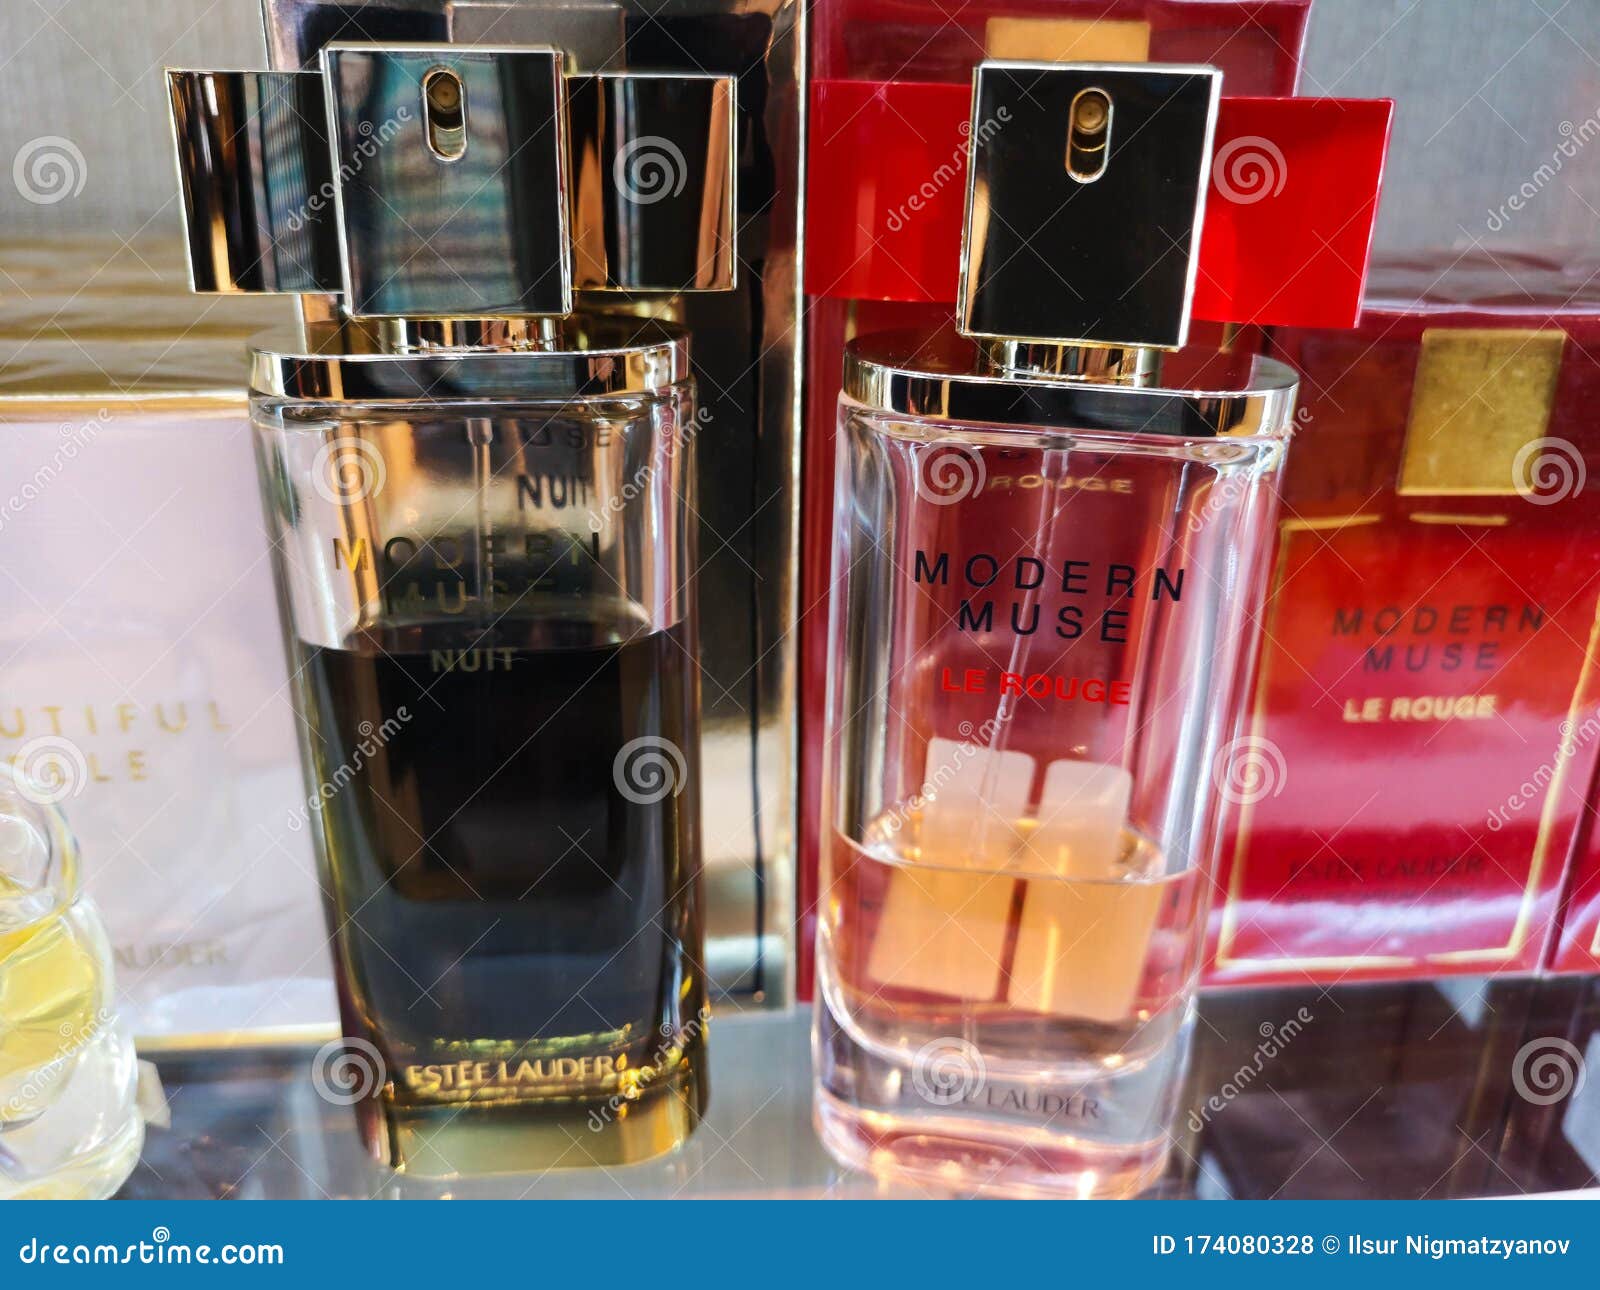 Female Perfumed Water with Fruit Aroma Modern Muse Le Rouge and with ...